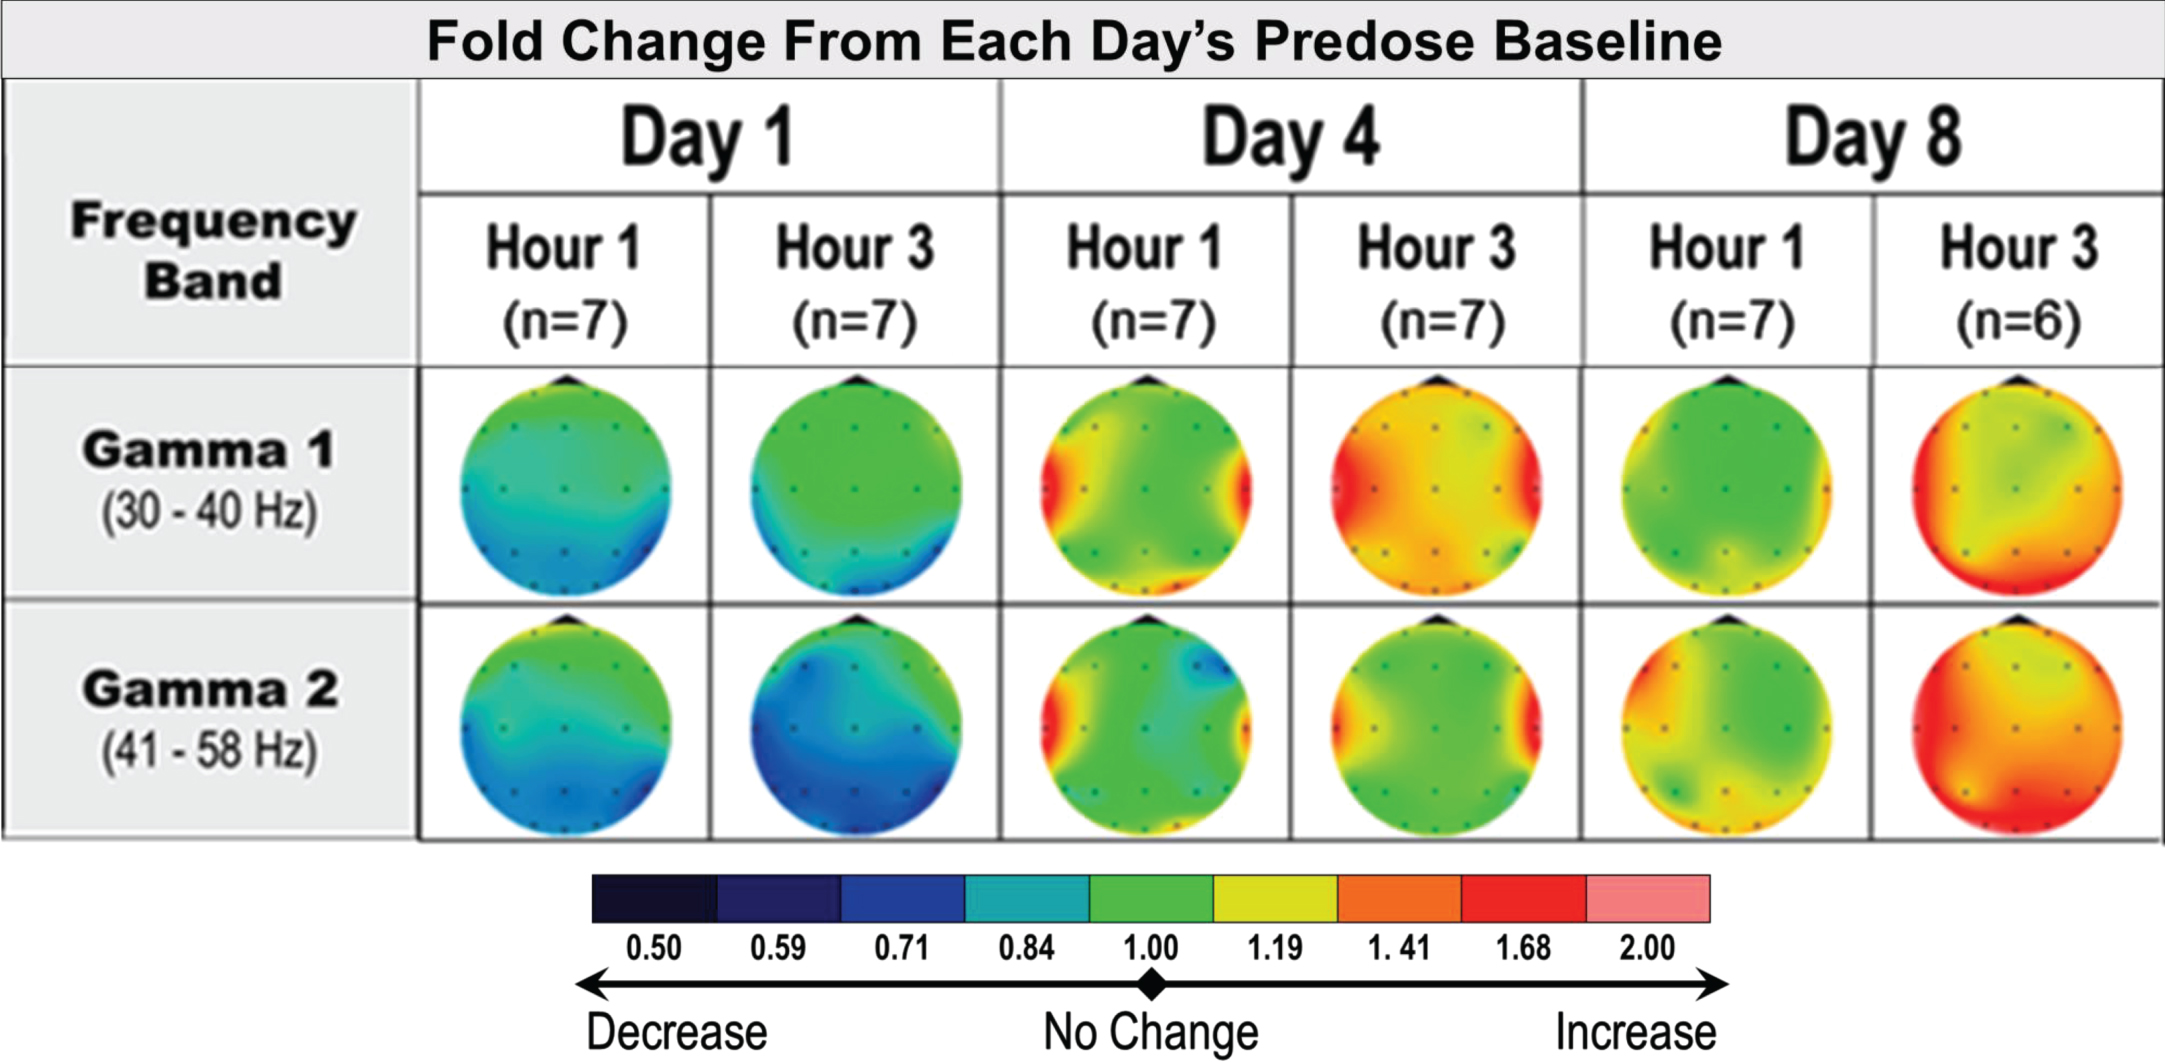 qEEG effects of repeat dose fosgonimeton in AD subjects (40 mg, SC, OD, 9 days). qEEG analysis of AD subjects (n = 7) demonstrates an increase in gamma power following daily fosgonimeton (40 mg, OD, SC) administration. qEEG was assessed at predose, and 1 hour and 3 hours postdose on treatment day 1, 4, and 8. Data are expressed as qEEG relative power normalized to each day’s predose recording. AD, Alzheimer’s disease; OD, once daily; qEEG, quantitative electroencephalogram; SC, subcutaneous.